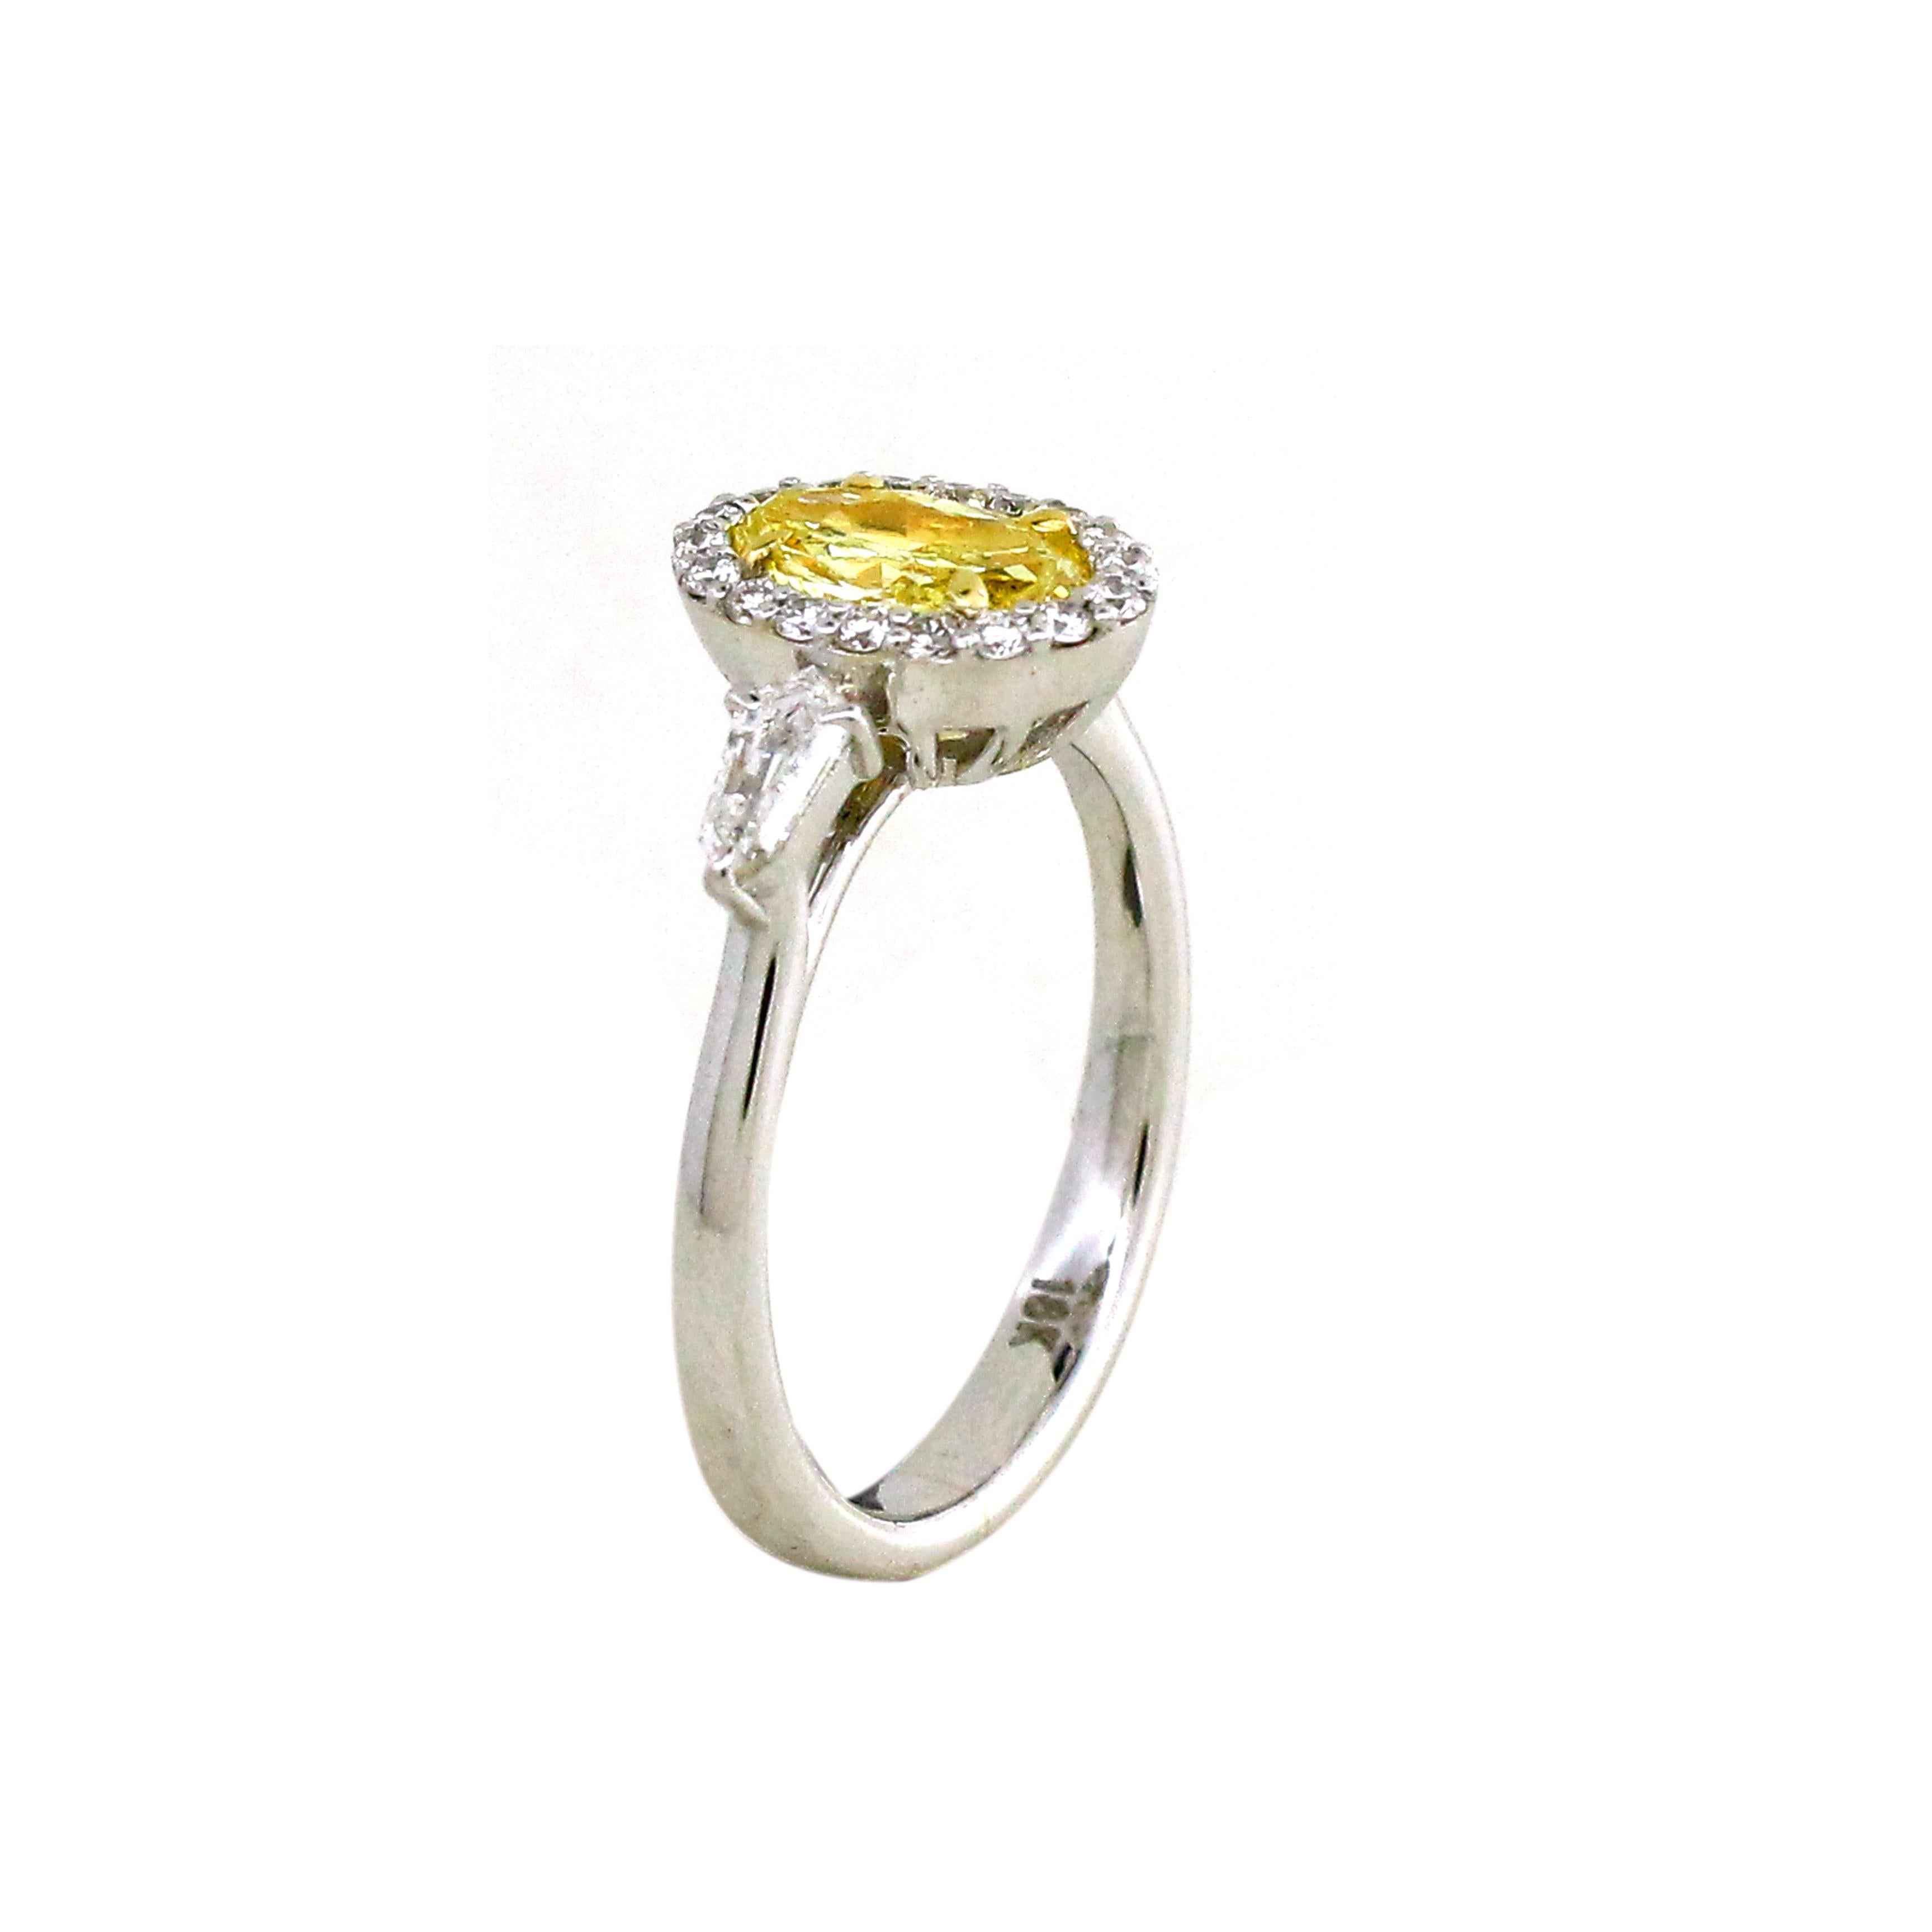 Introducing a masterpiece that radiates with a harmonious fusion of elegance and individuality. At the heart of this enchanting ring, a mesmerizing 0.81-carat center yellow diamond takes center stage. 
Surrounding this radiant centerpiece is a